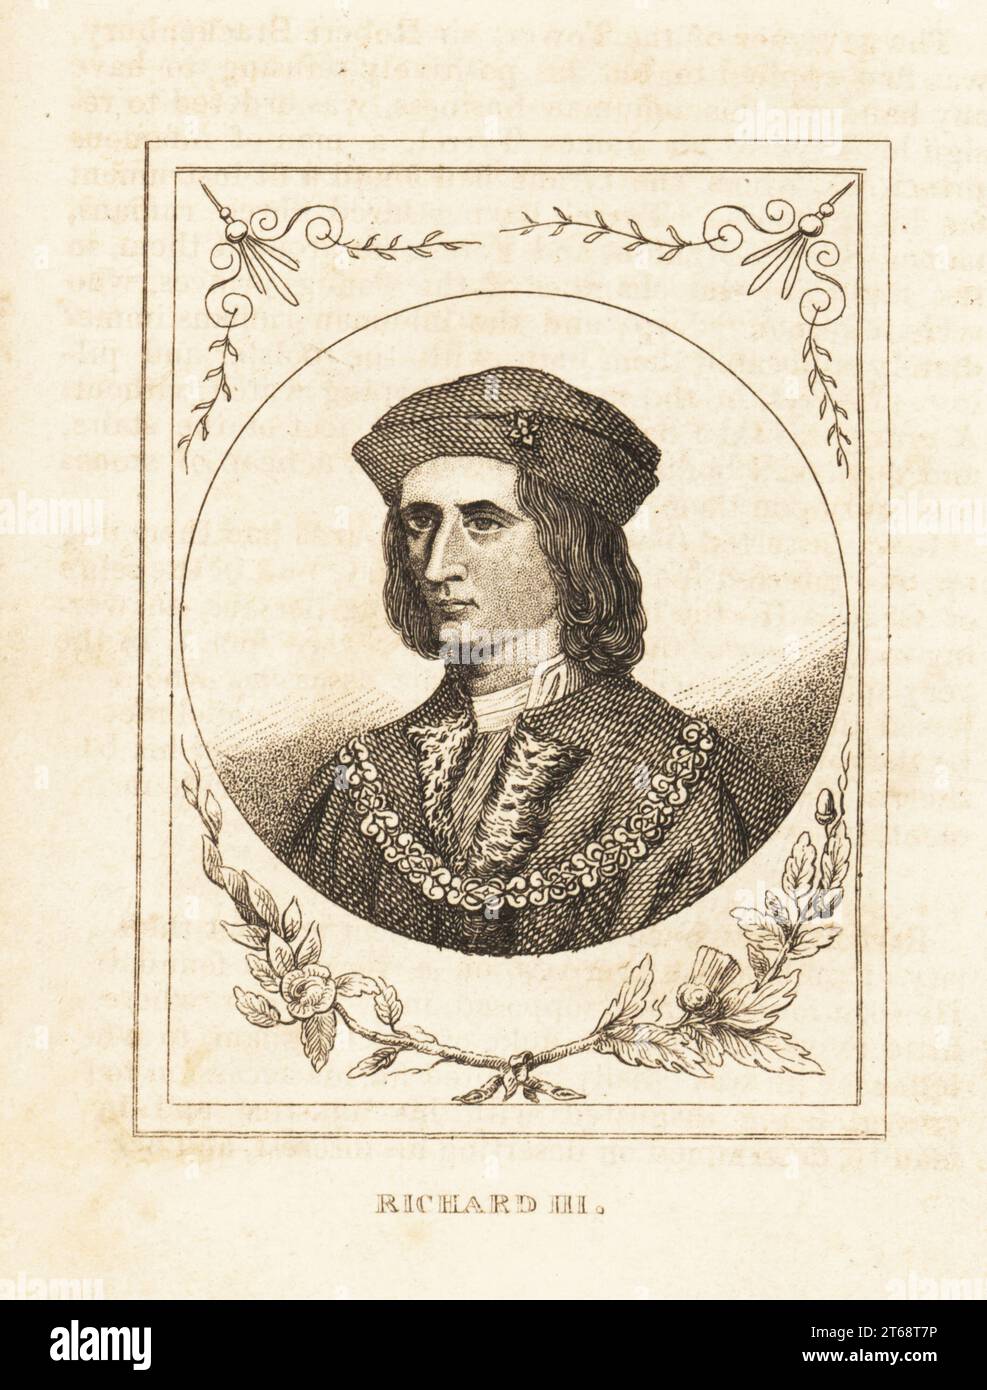 Portrait of King Richard III of England, 1452-1485 Copperplate engraving from M. A. Jones History of England from Julius Caesar to George IV, G. Virtue, 26 Ivy Lane, London, 1836. Stock Photo